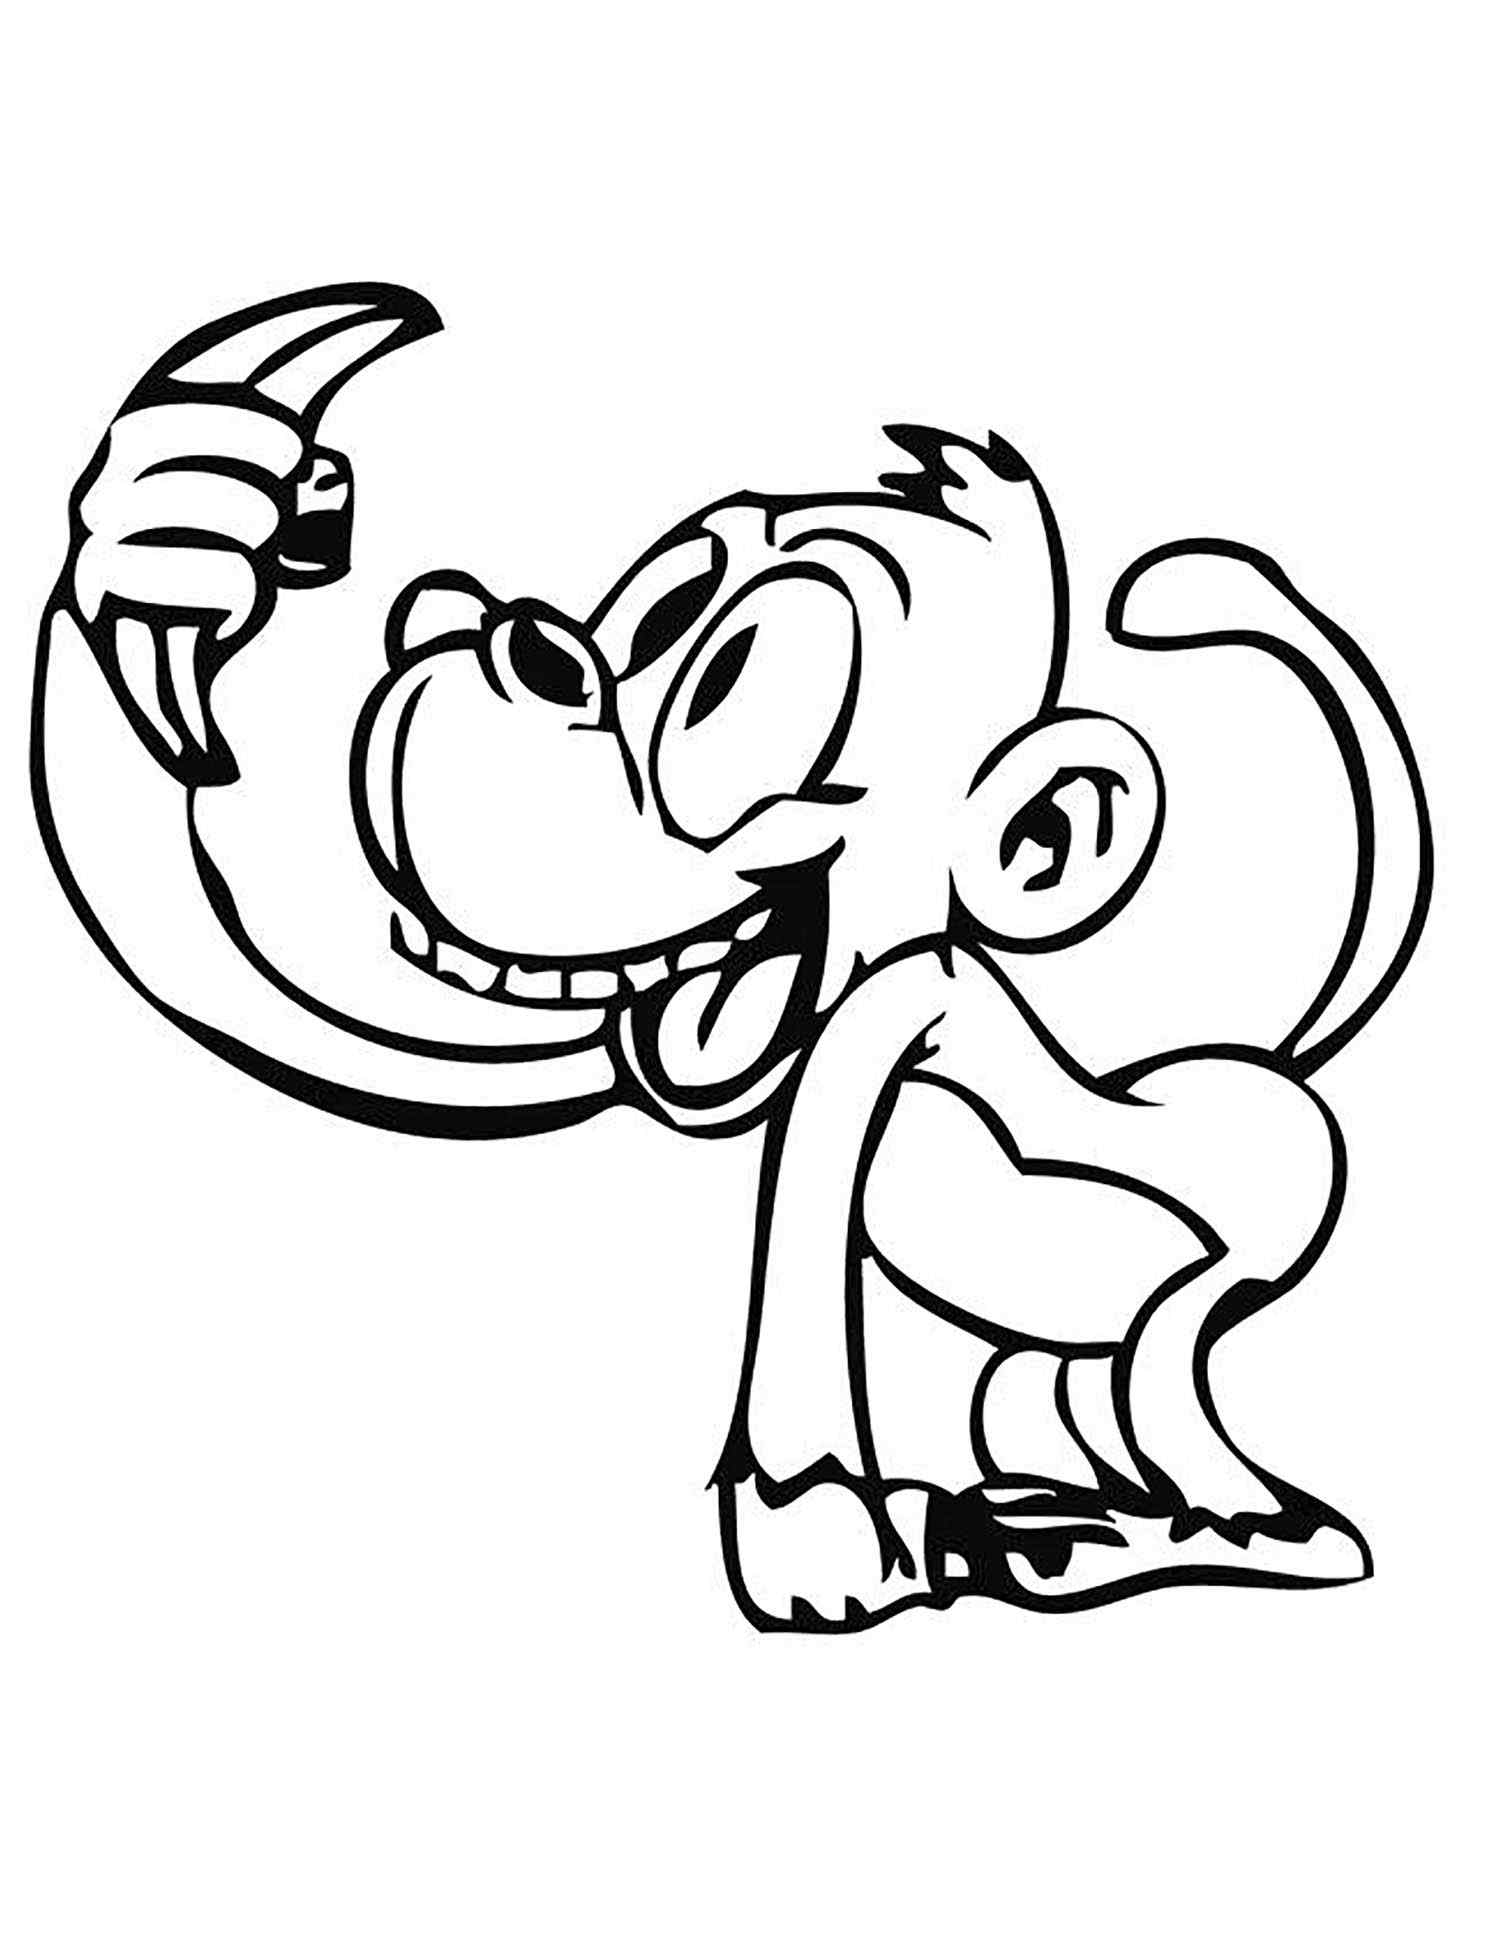 New Perfect Monkey For Kids Coloring Page